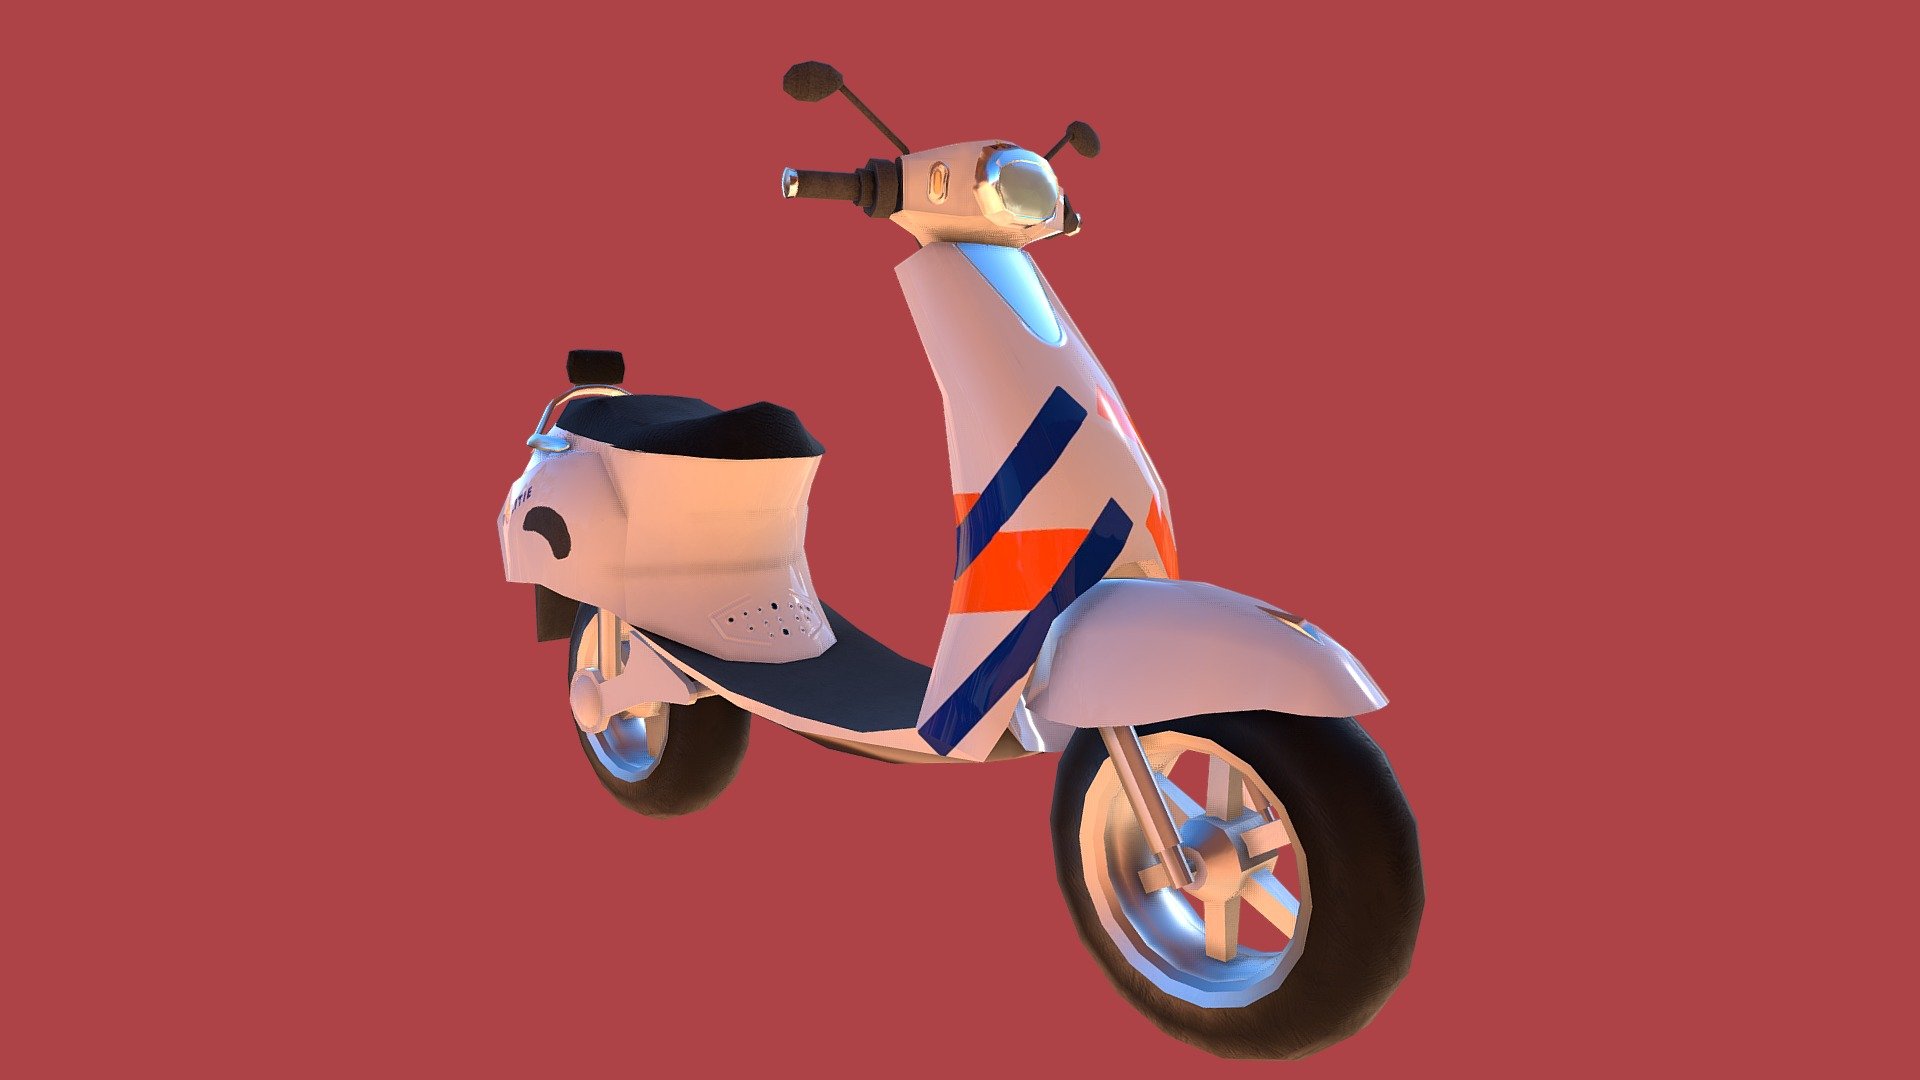 Politie Scooter I have made to get a intership.
Politie Scooter because they are unable to use a bicycle
Feedback is Welcom

Cheers! - Politie Scooter - 3D model by thijs174 3d model